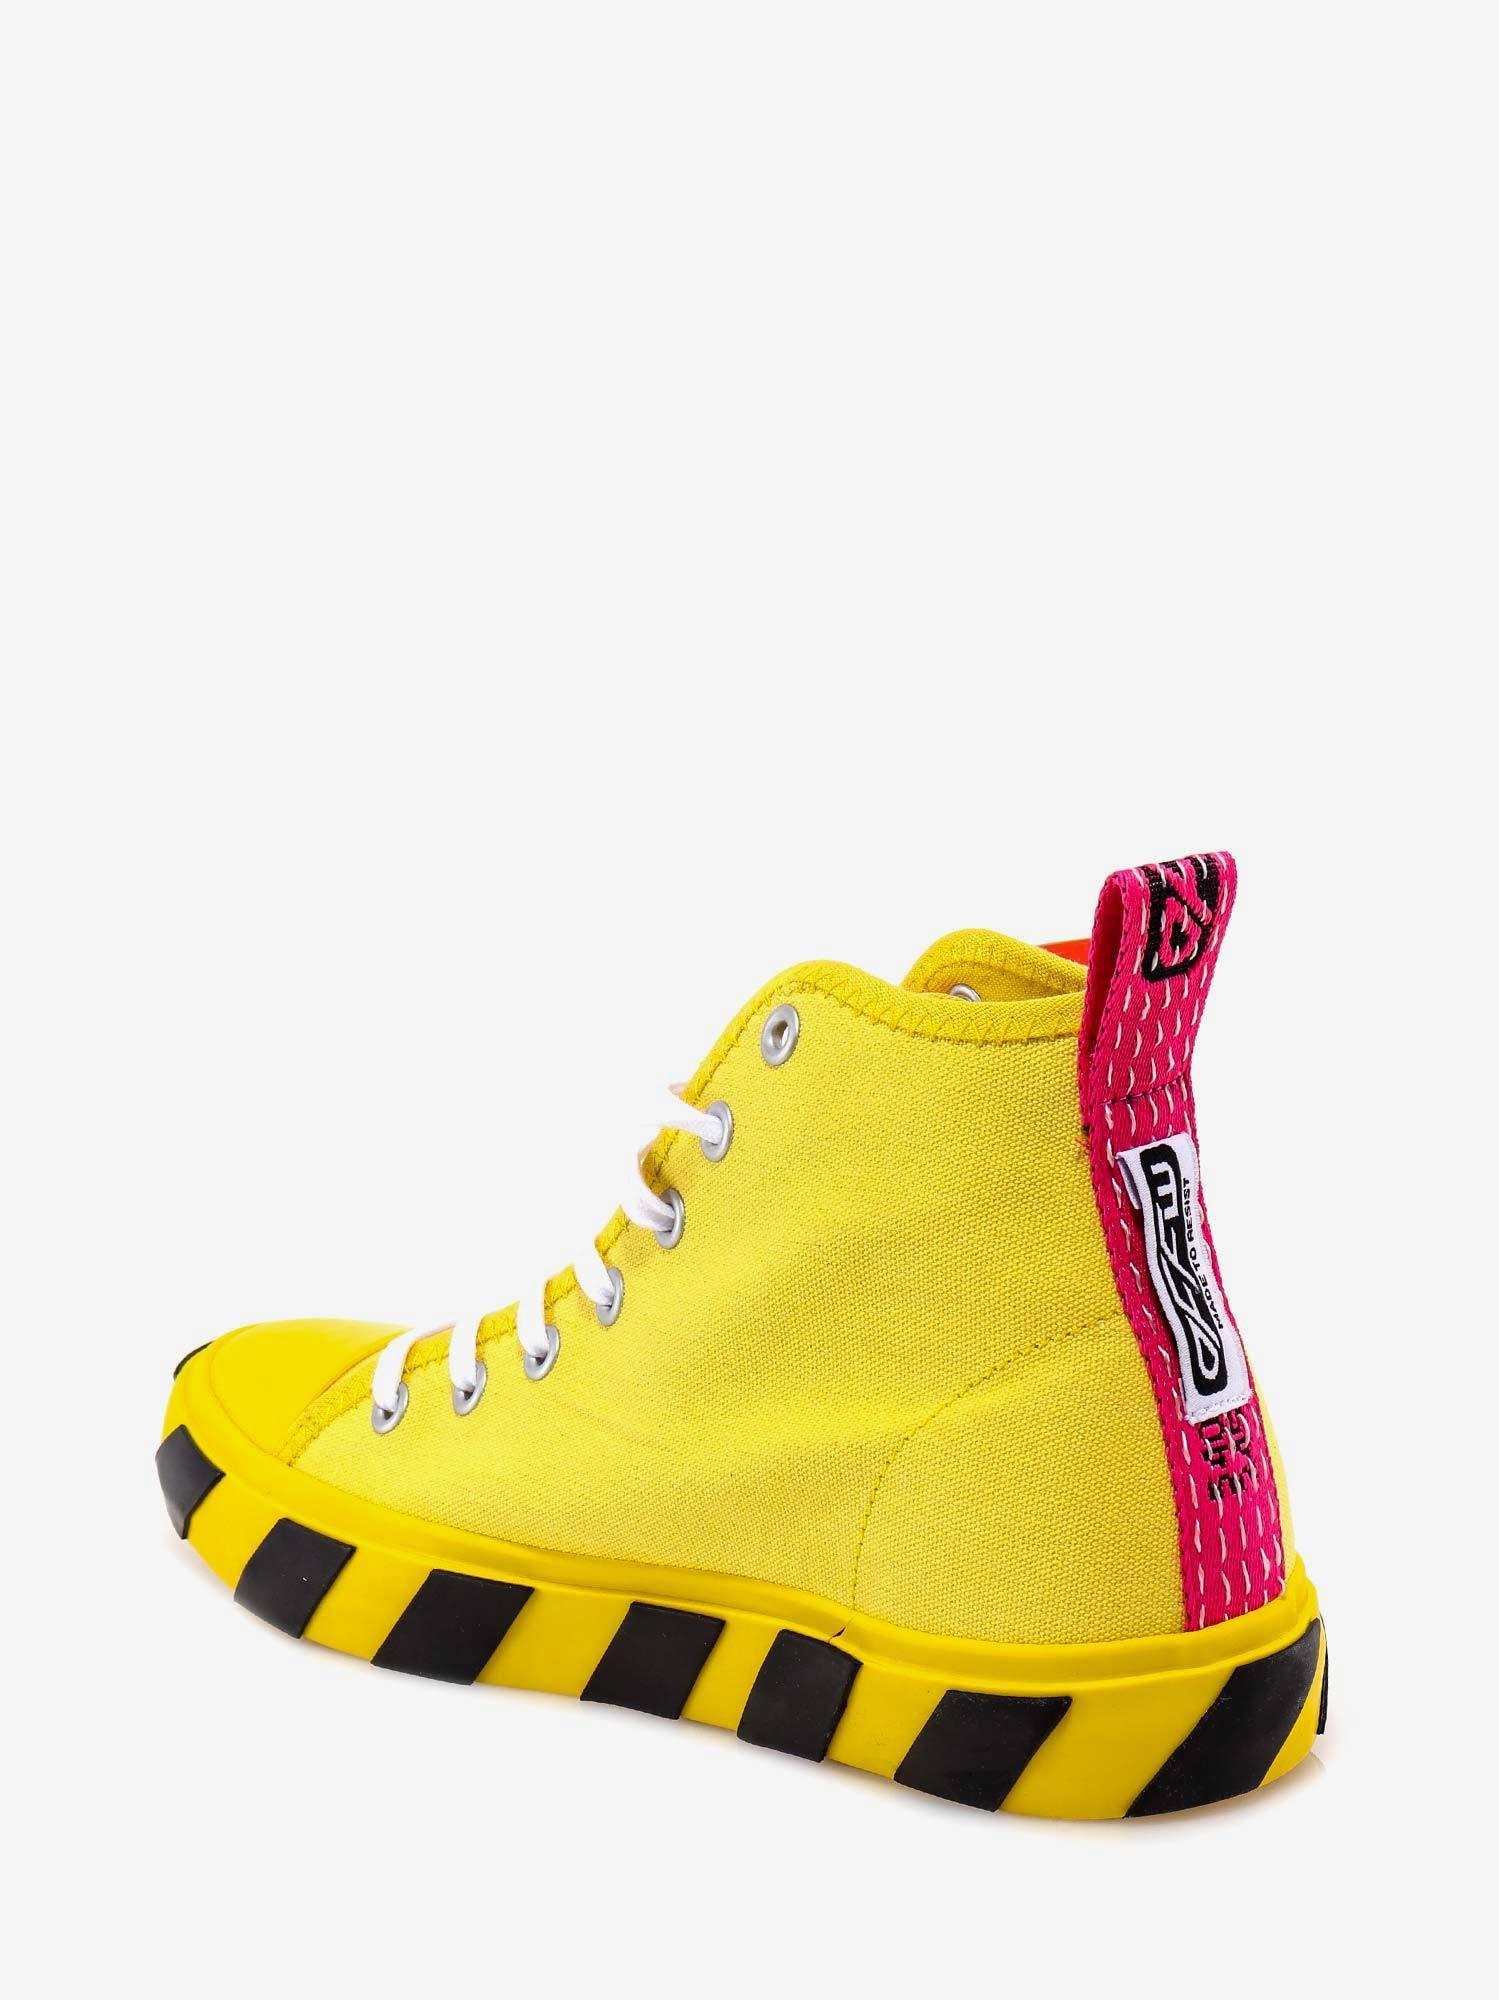 Off-White c/o Virgil Abloh Mid Top Sneakers in Yellow for Men -